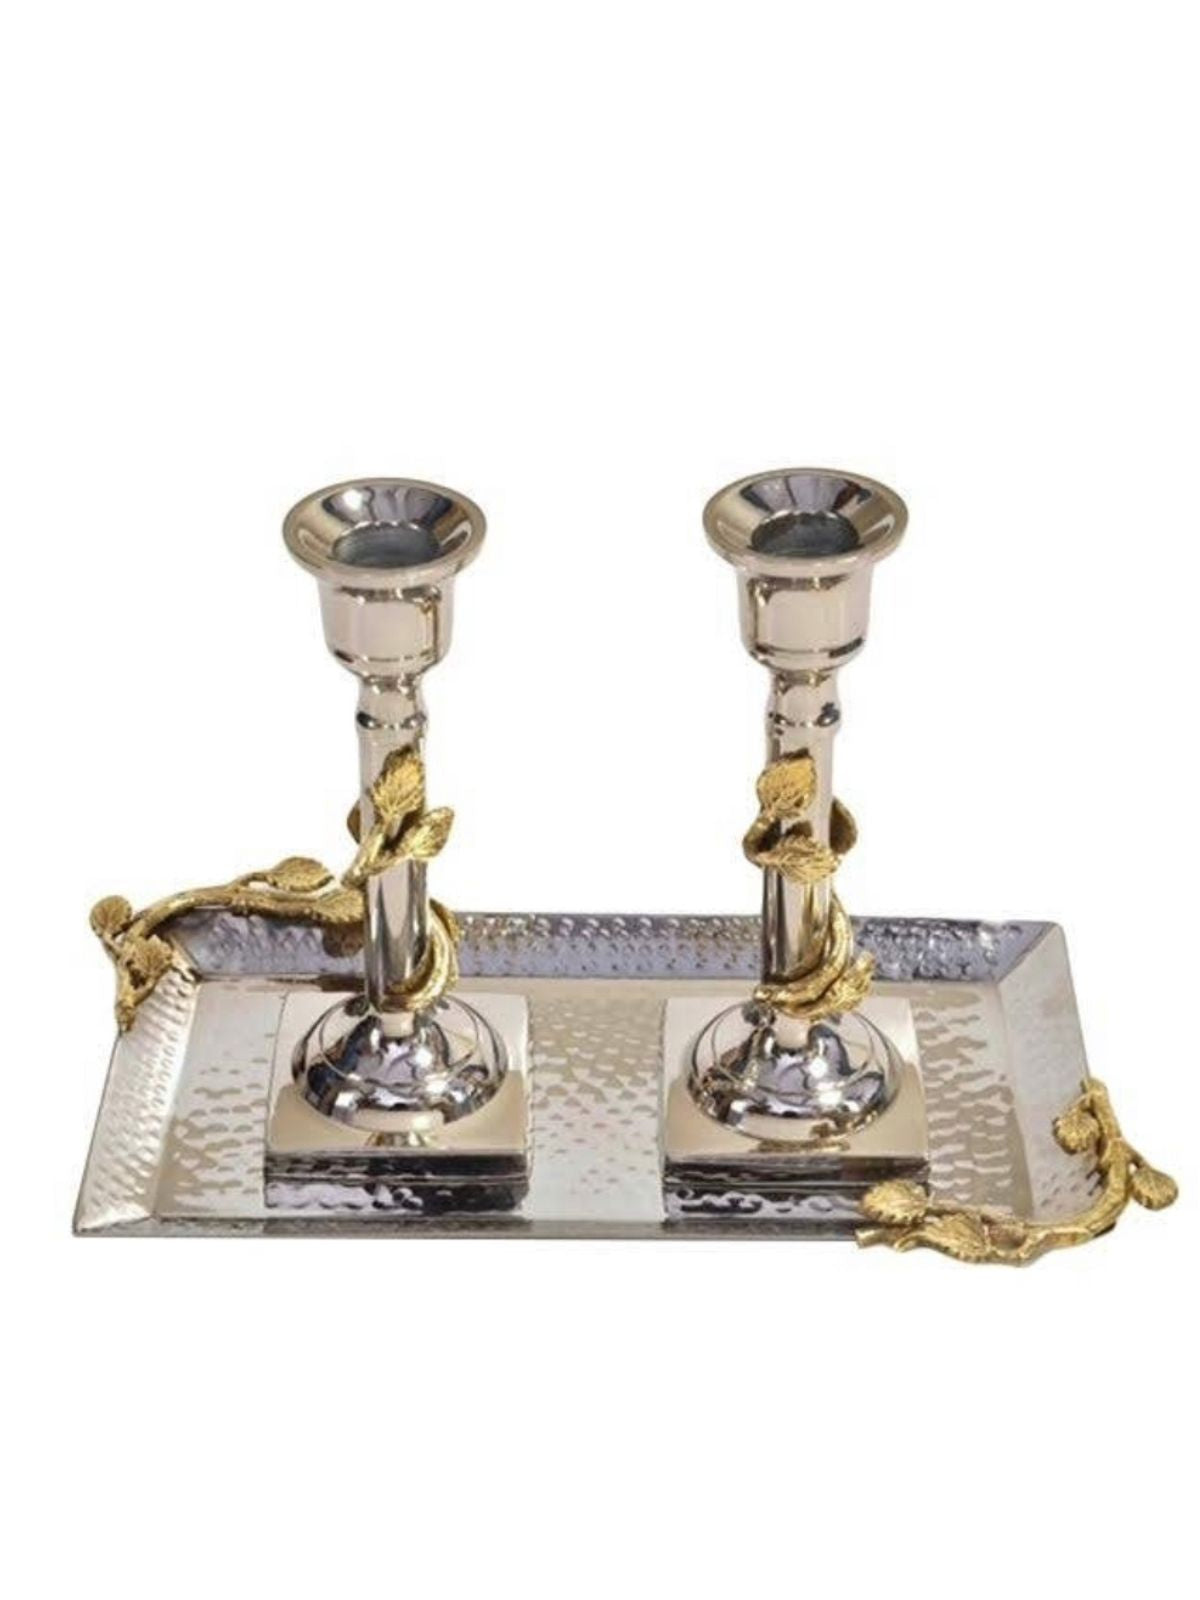 Hammered Stainless Steel Candlestick Holders Set with Silver and Gold Jeweled Flower Design.